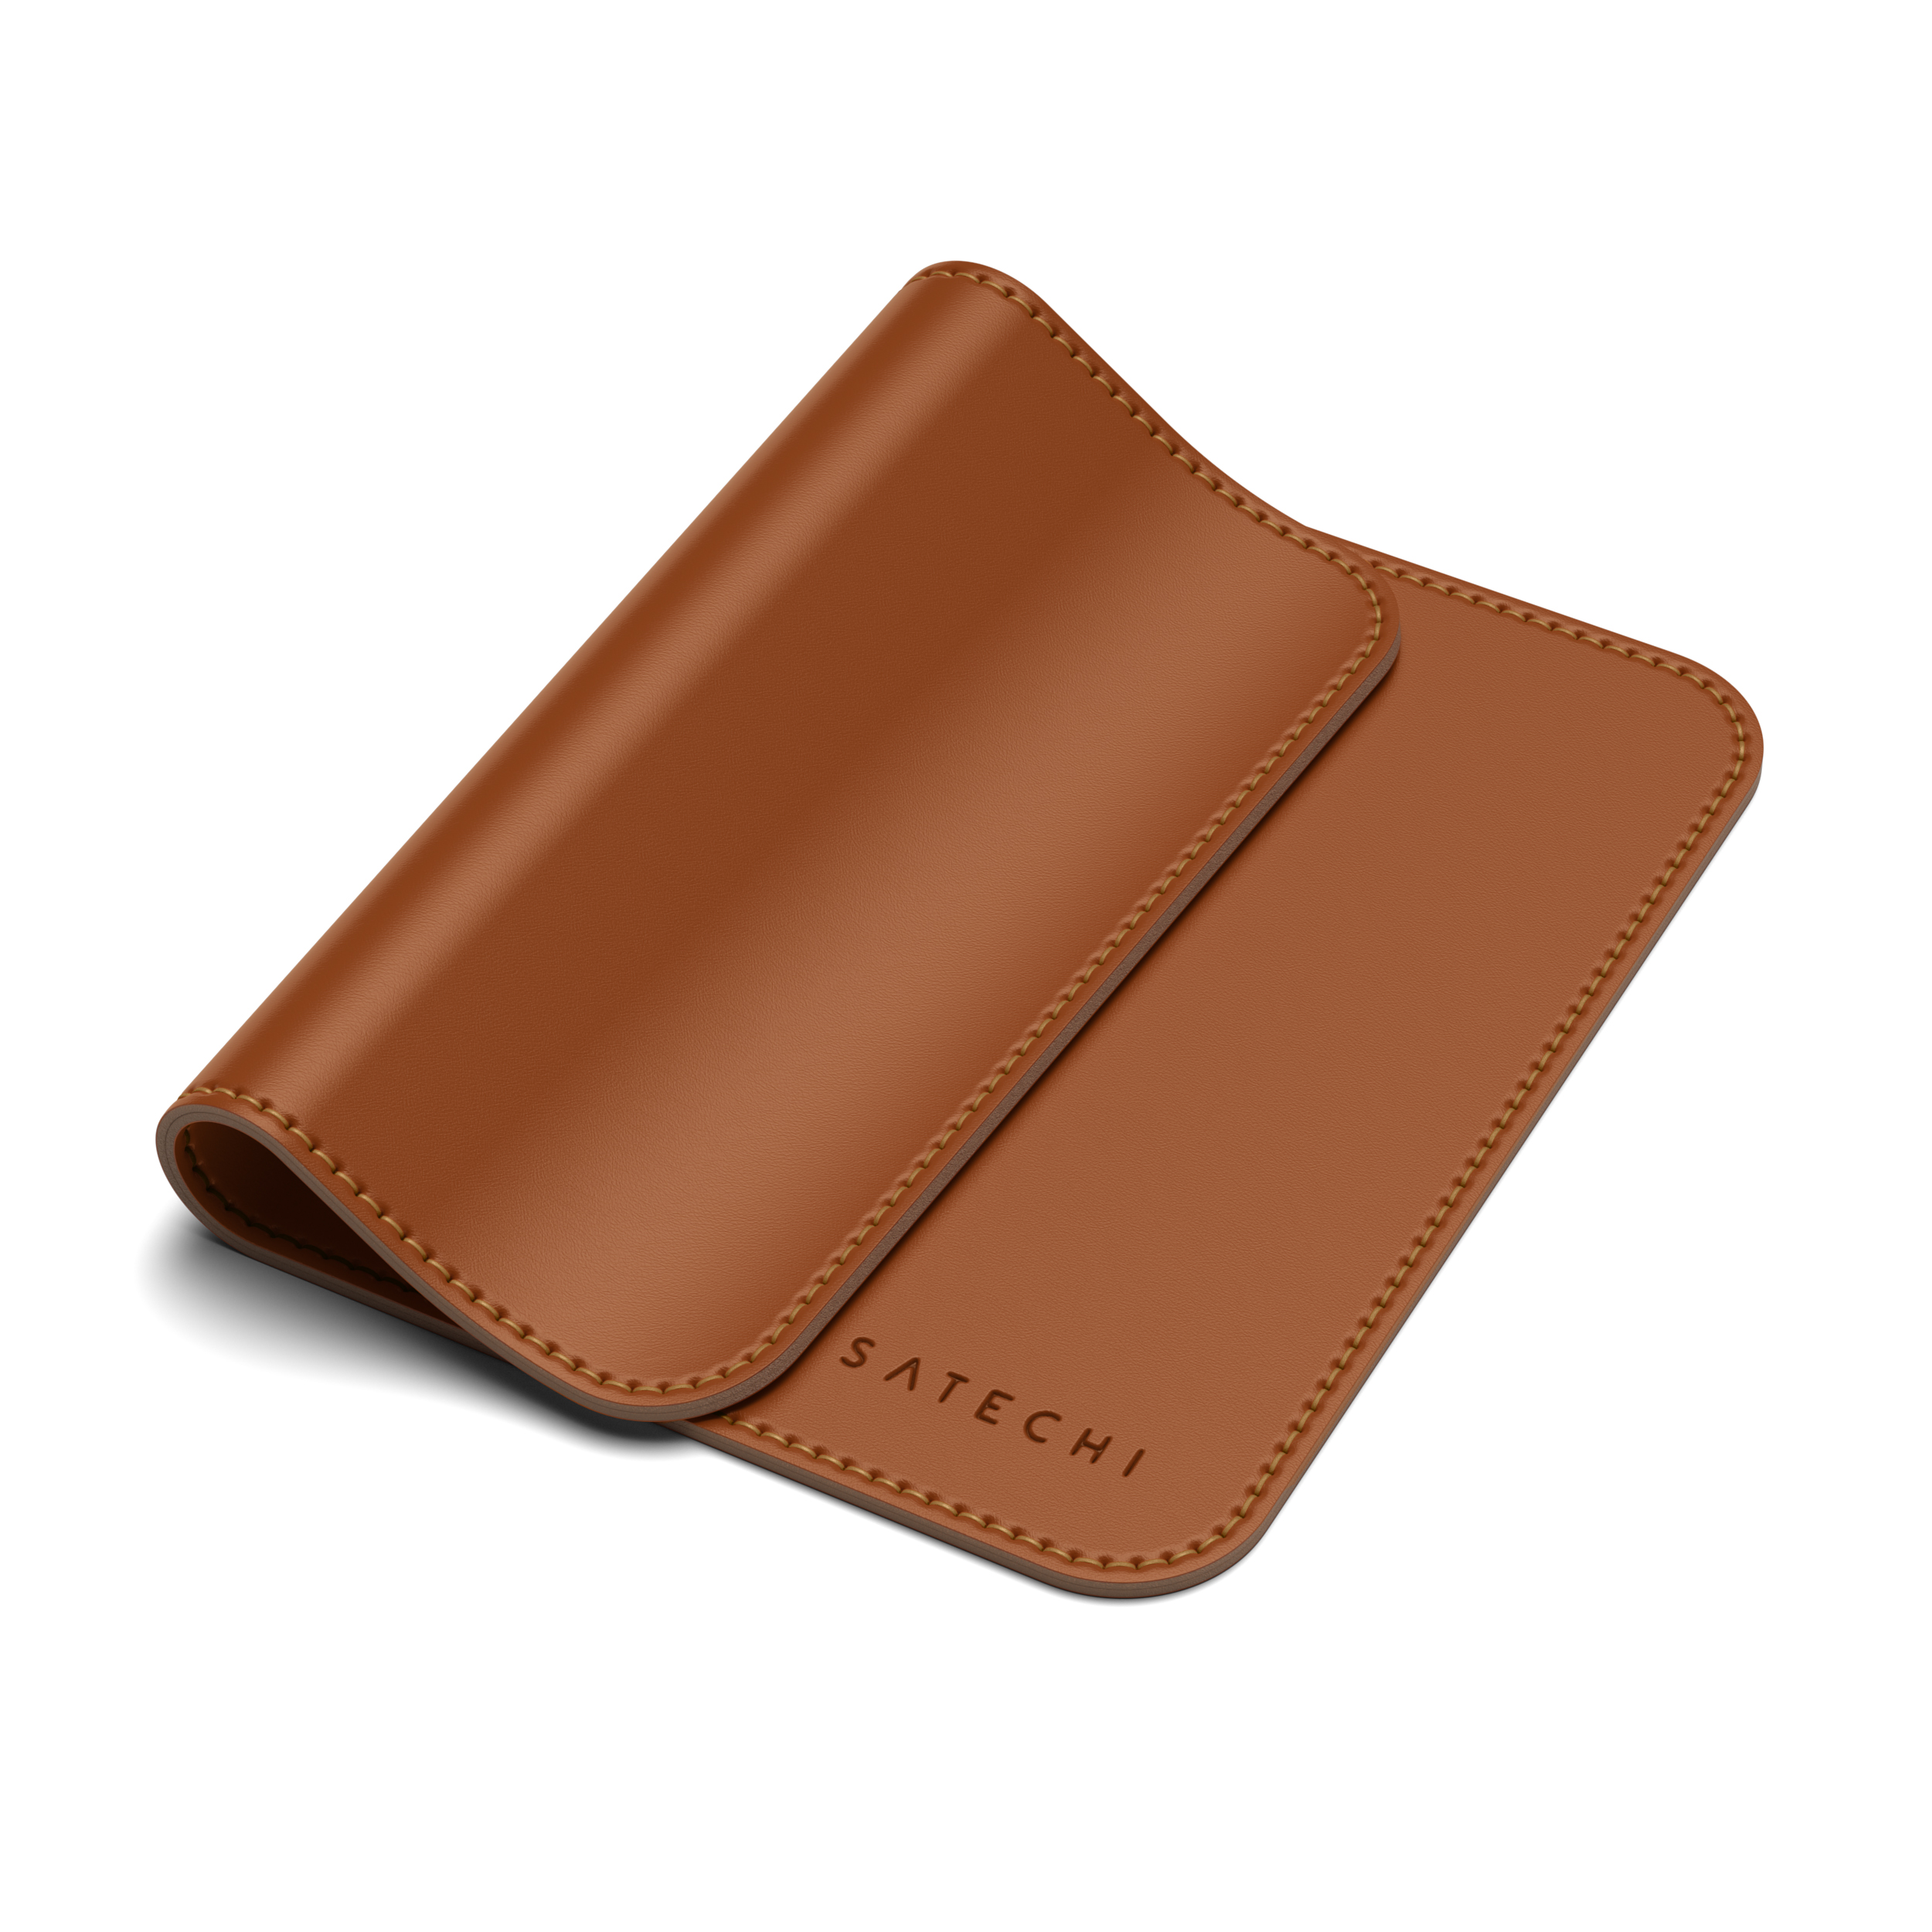 Brown SATECHI Pad 24,89 - Mousepad x Mouse cm) (19 cm Eco-Leather